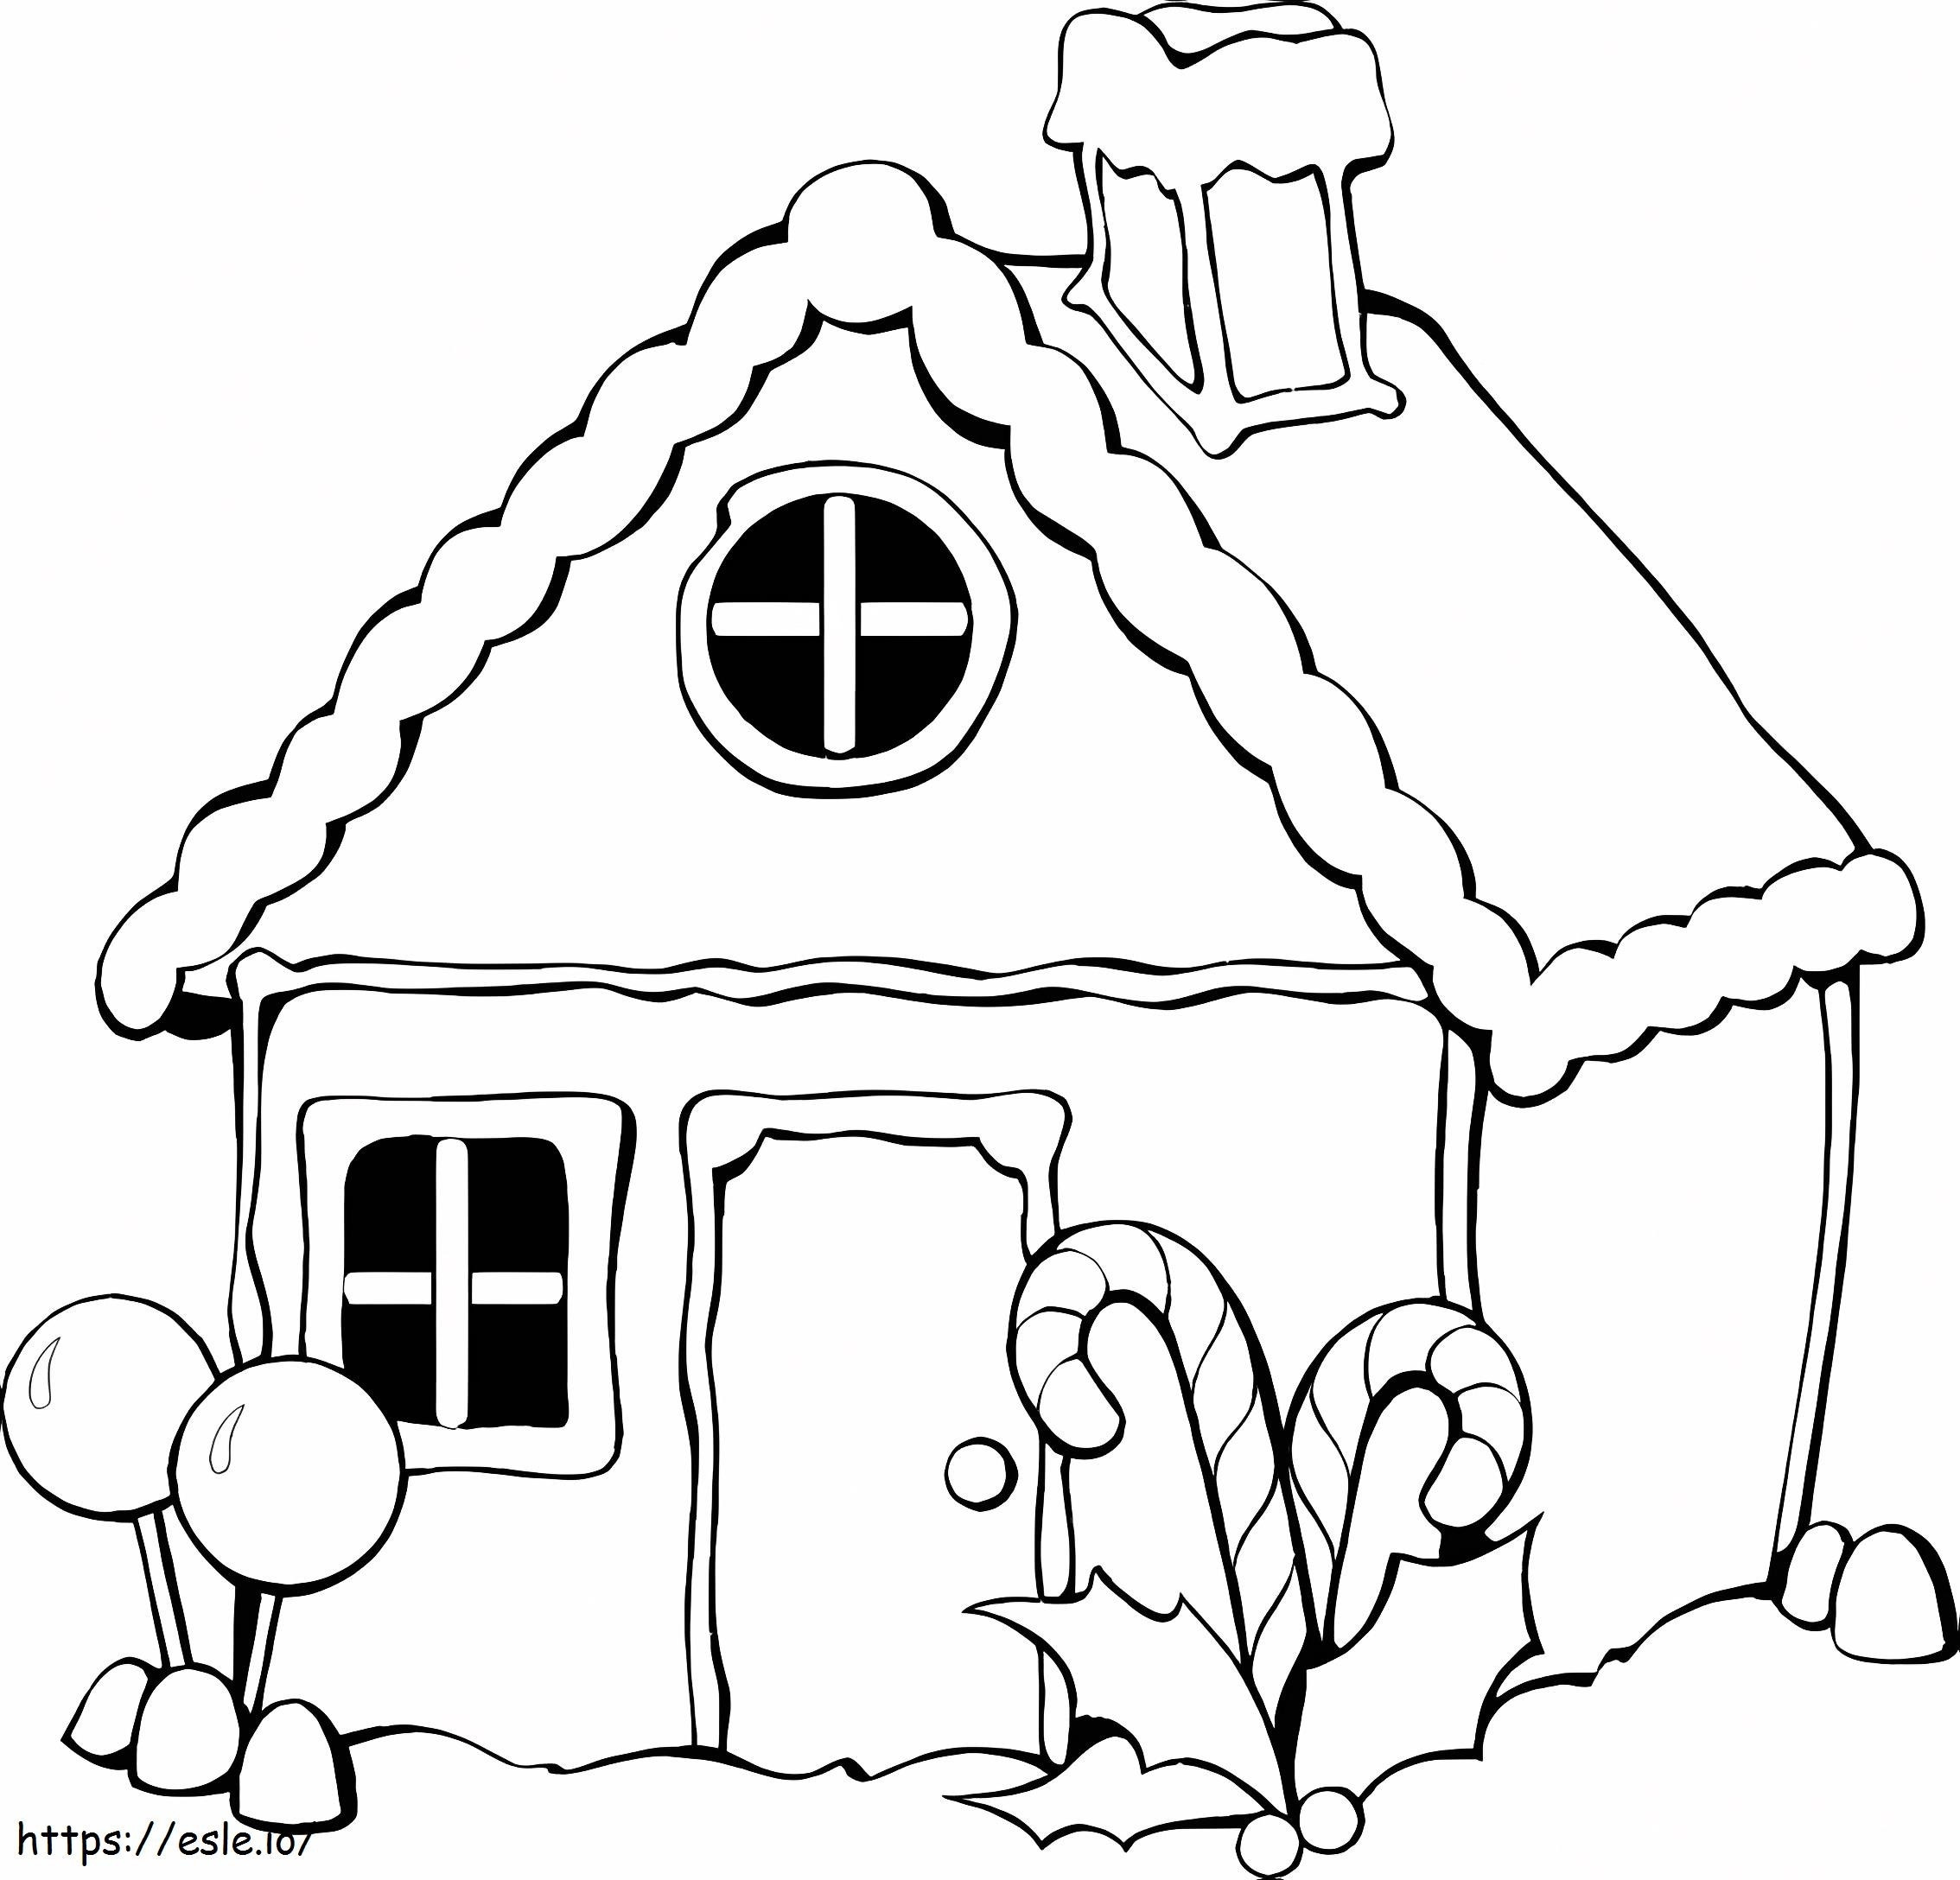 1576486842 Sweet House 1 coloring page